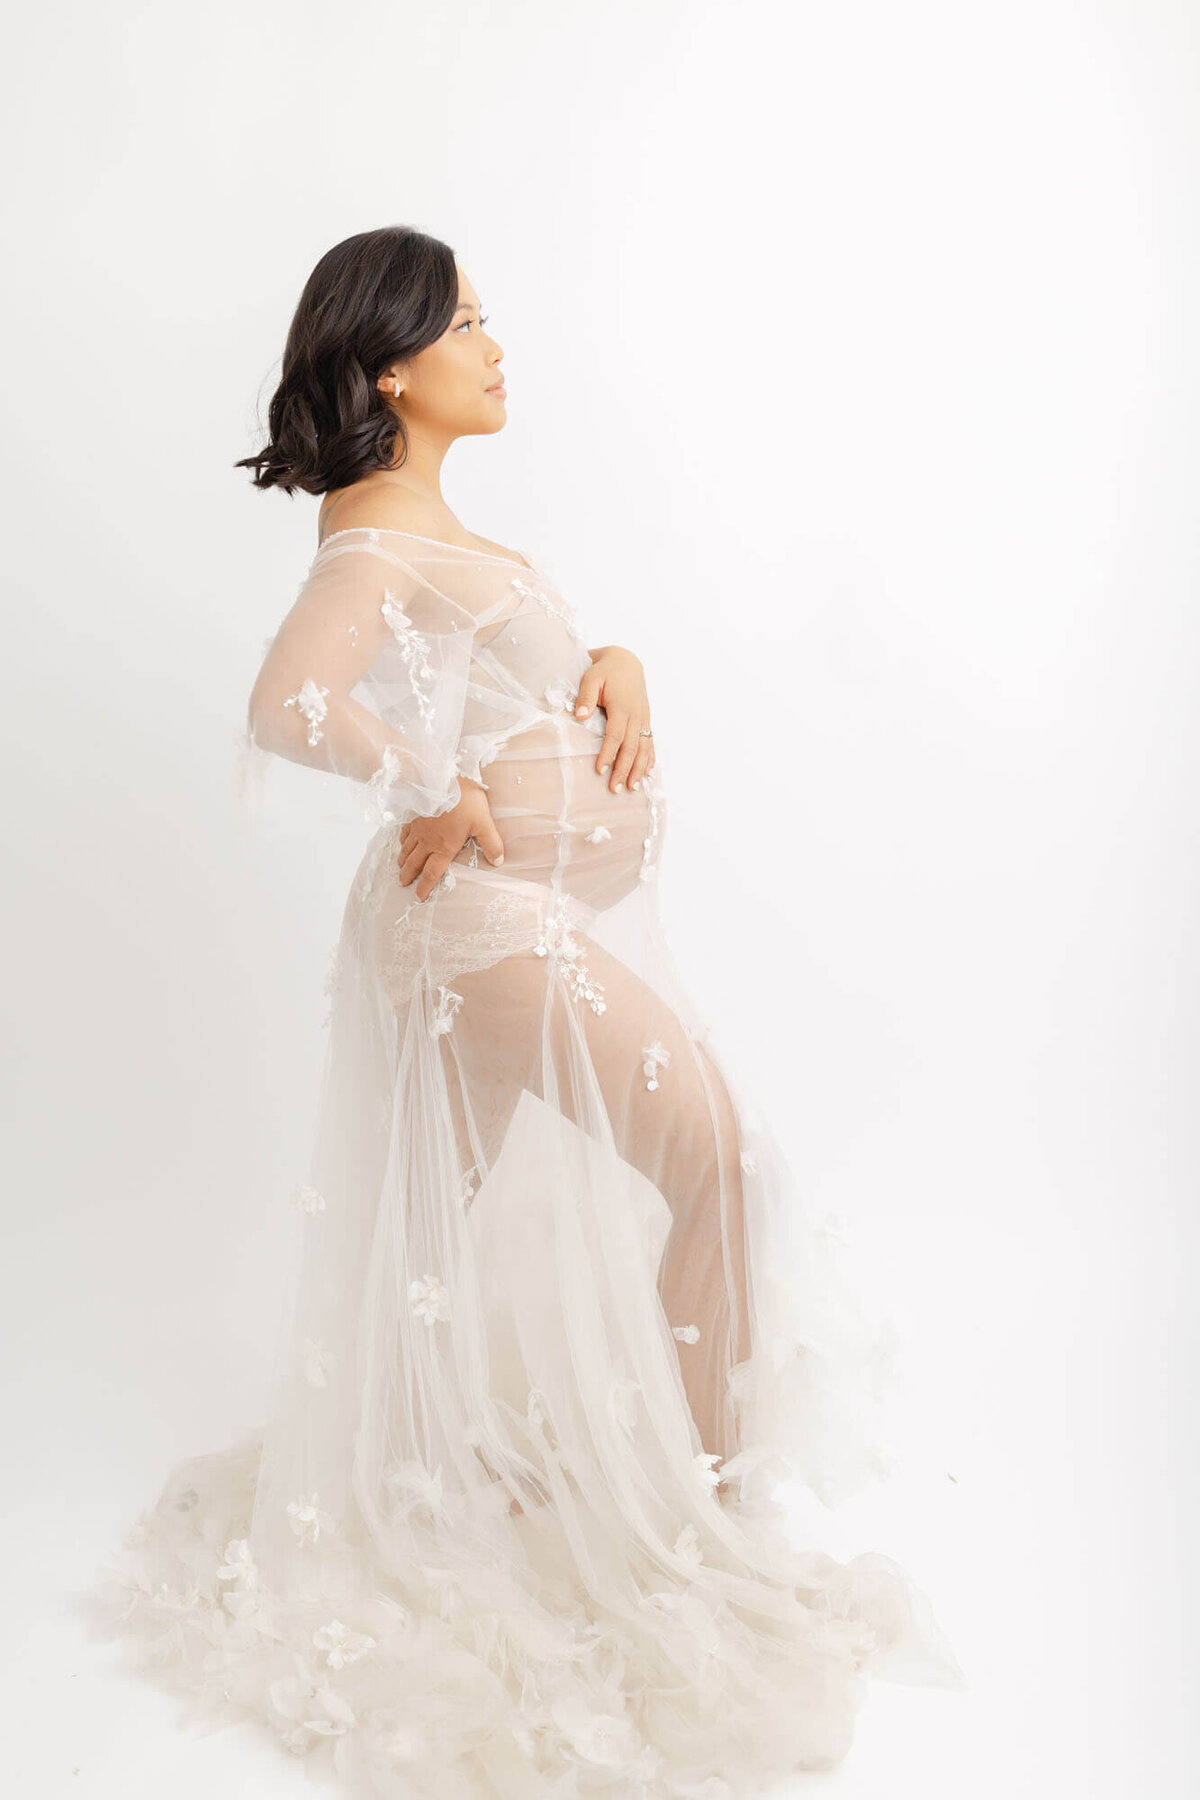 Profile view of Pregnant Mama in stunning tulle dress. She has one hand propped up on her back and one hand resting on her belly. She is looking straight ahead and has shoulder length black hair in loose curls. One leg is popped out a bit in front of her creating a beautiful shape.